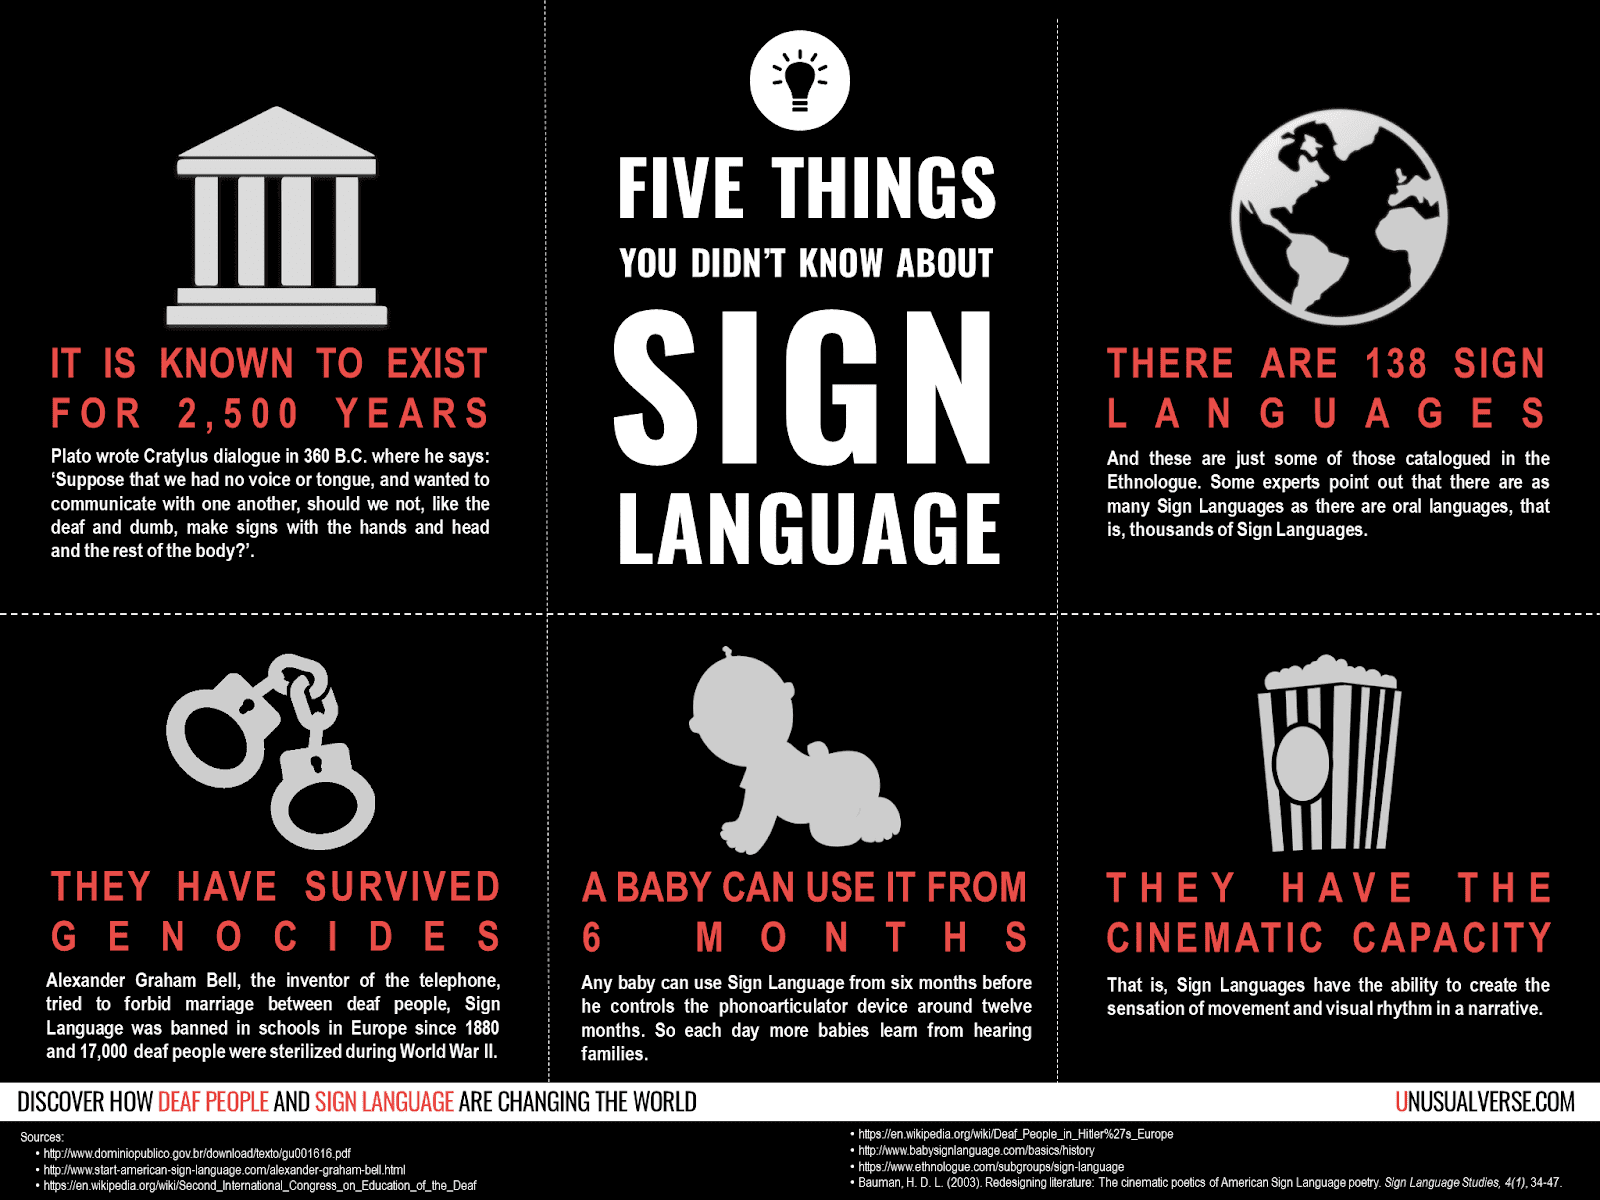 Some Facts about Sign Language and Interpreting